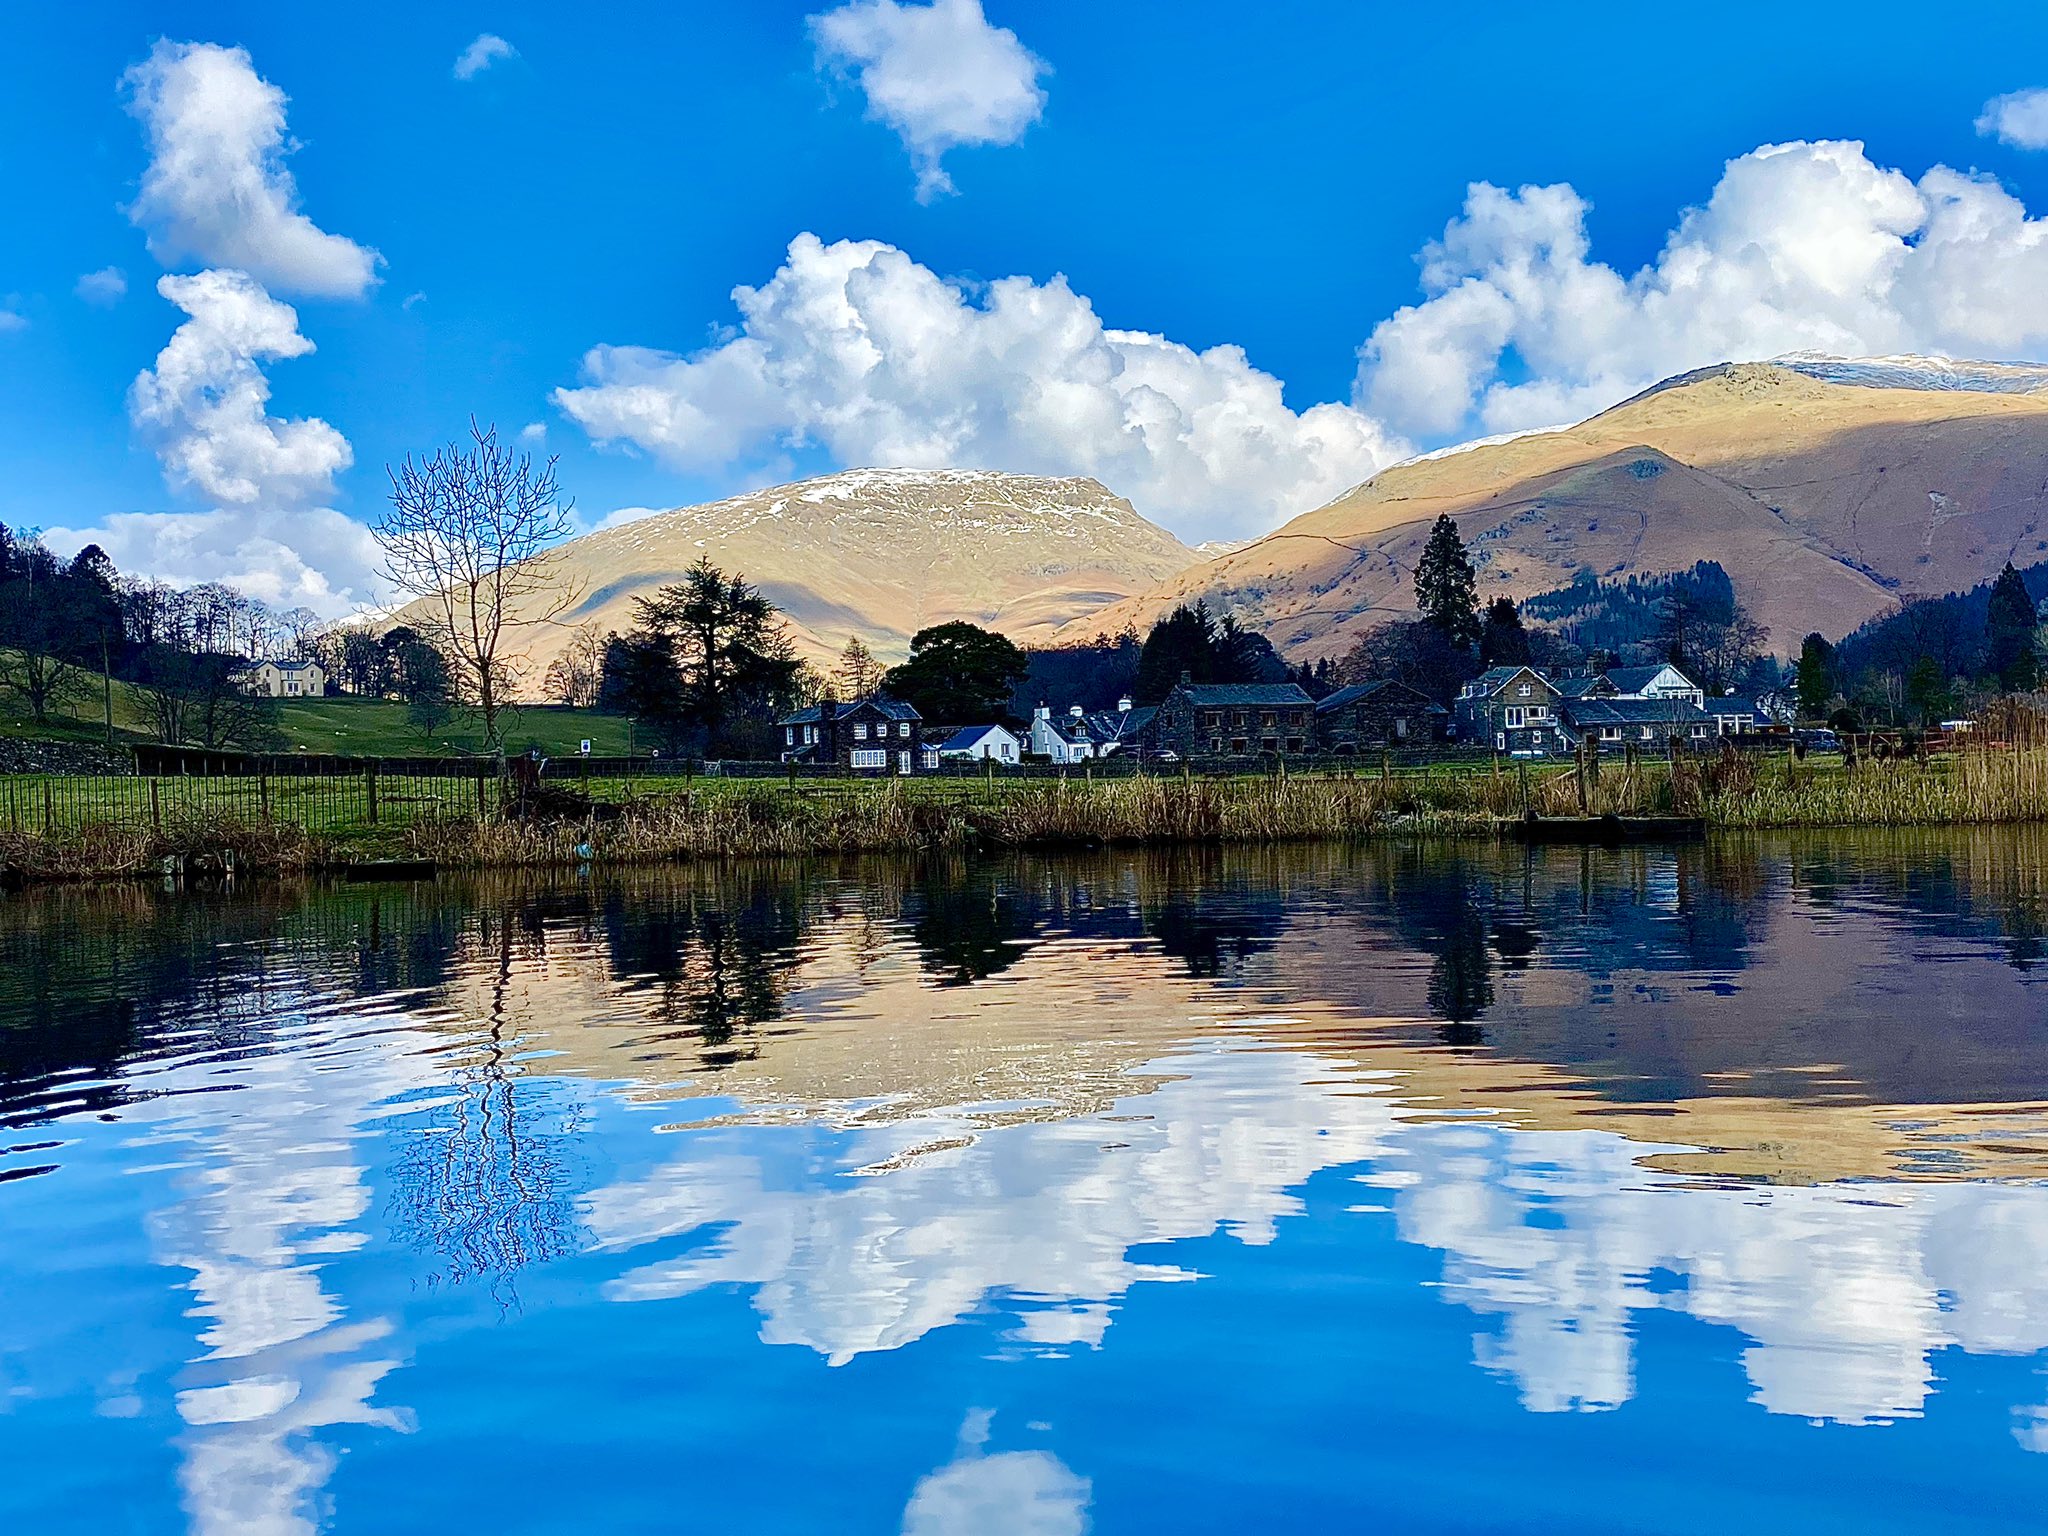 3rd Place Reflections in Grasmere, Lake District by Faeryland Grasmere @faerymere